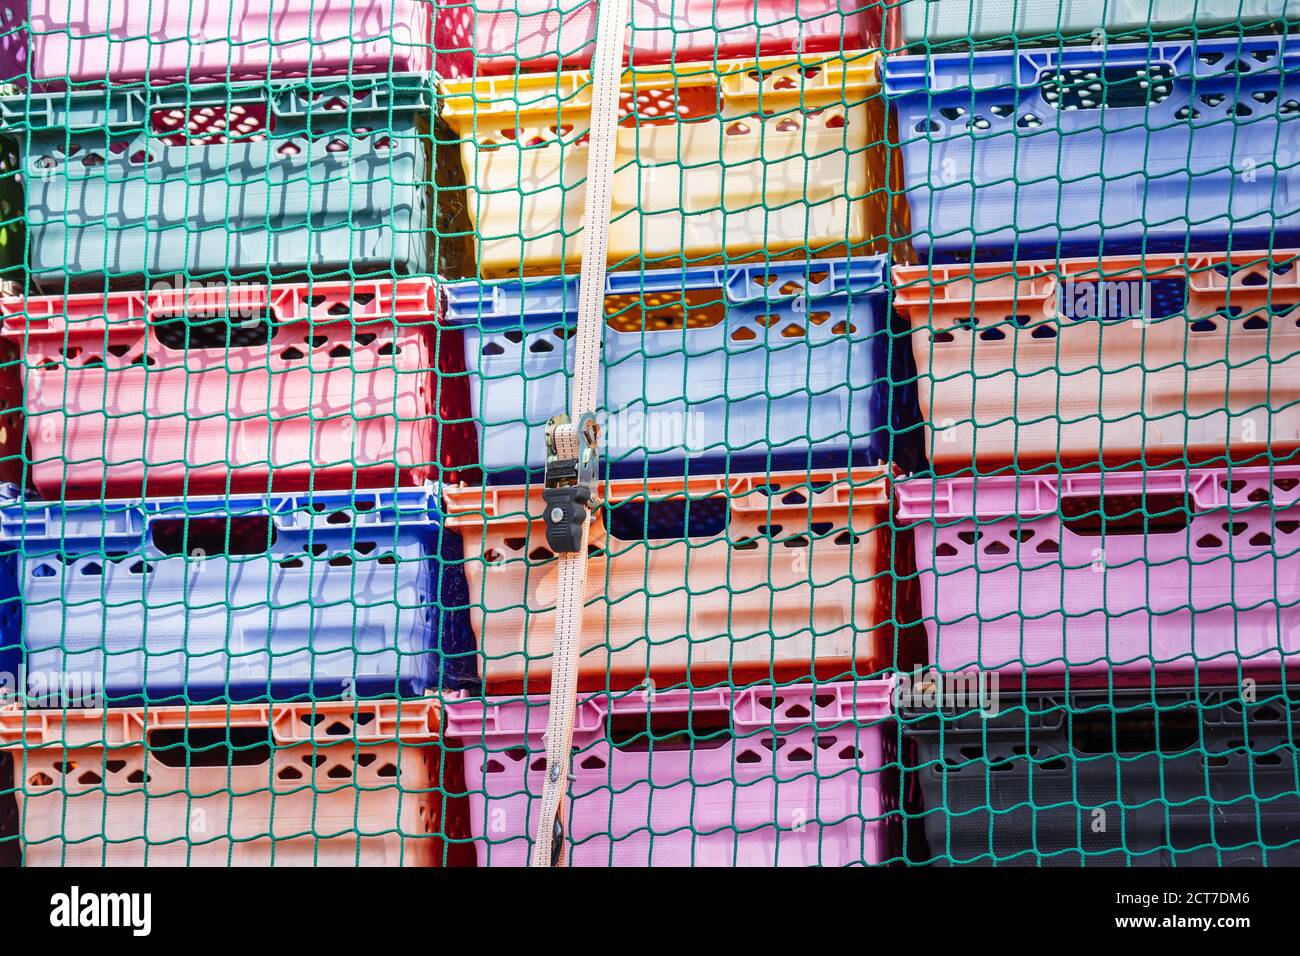 UK, London, Camden Town, 12 September 2020.Colored plastic boxes for transportation on a lorry fixed by Truck Net and Ratchet Strap Stock Photo